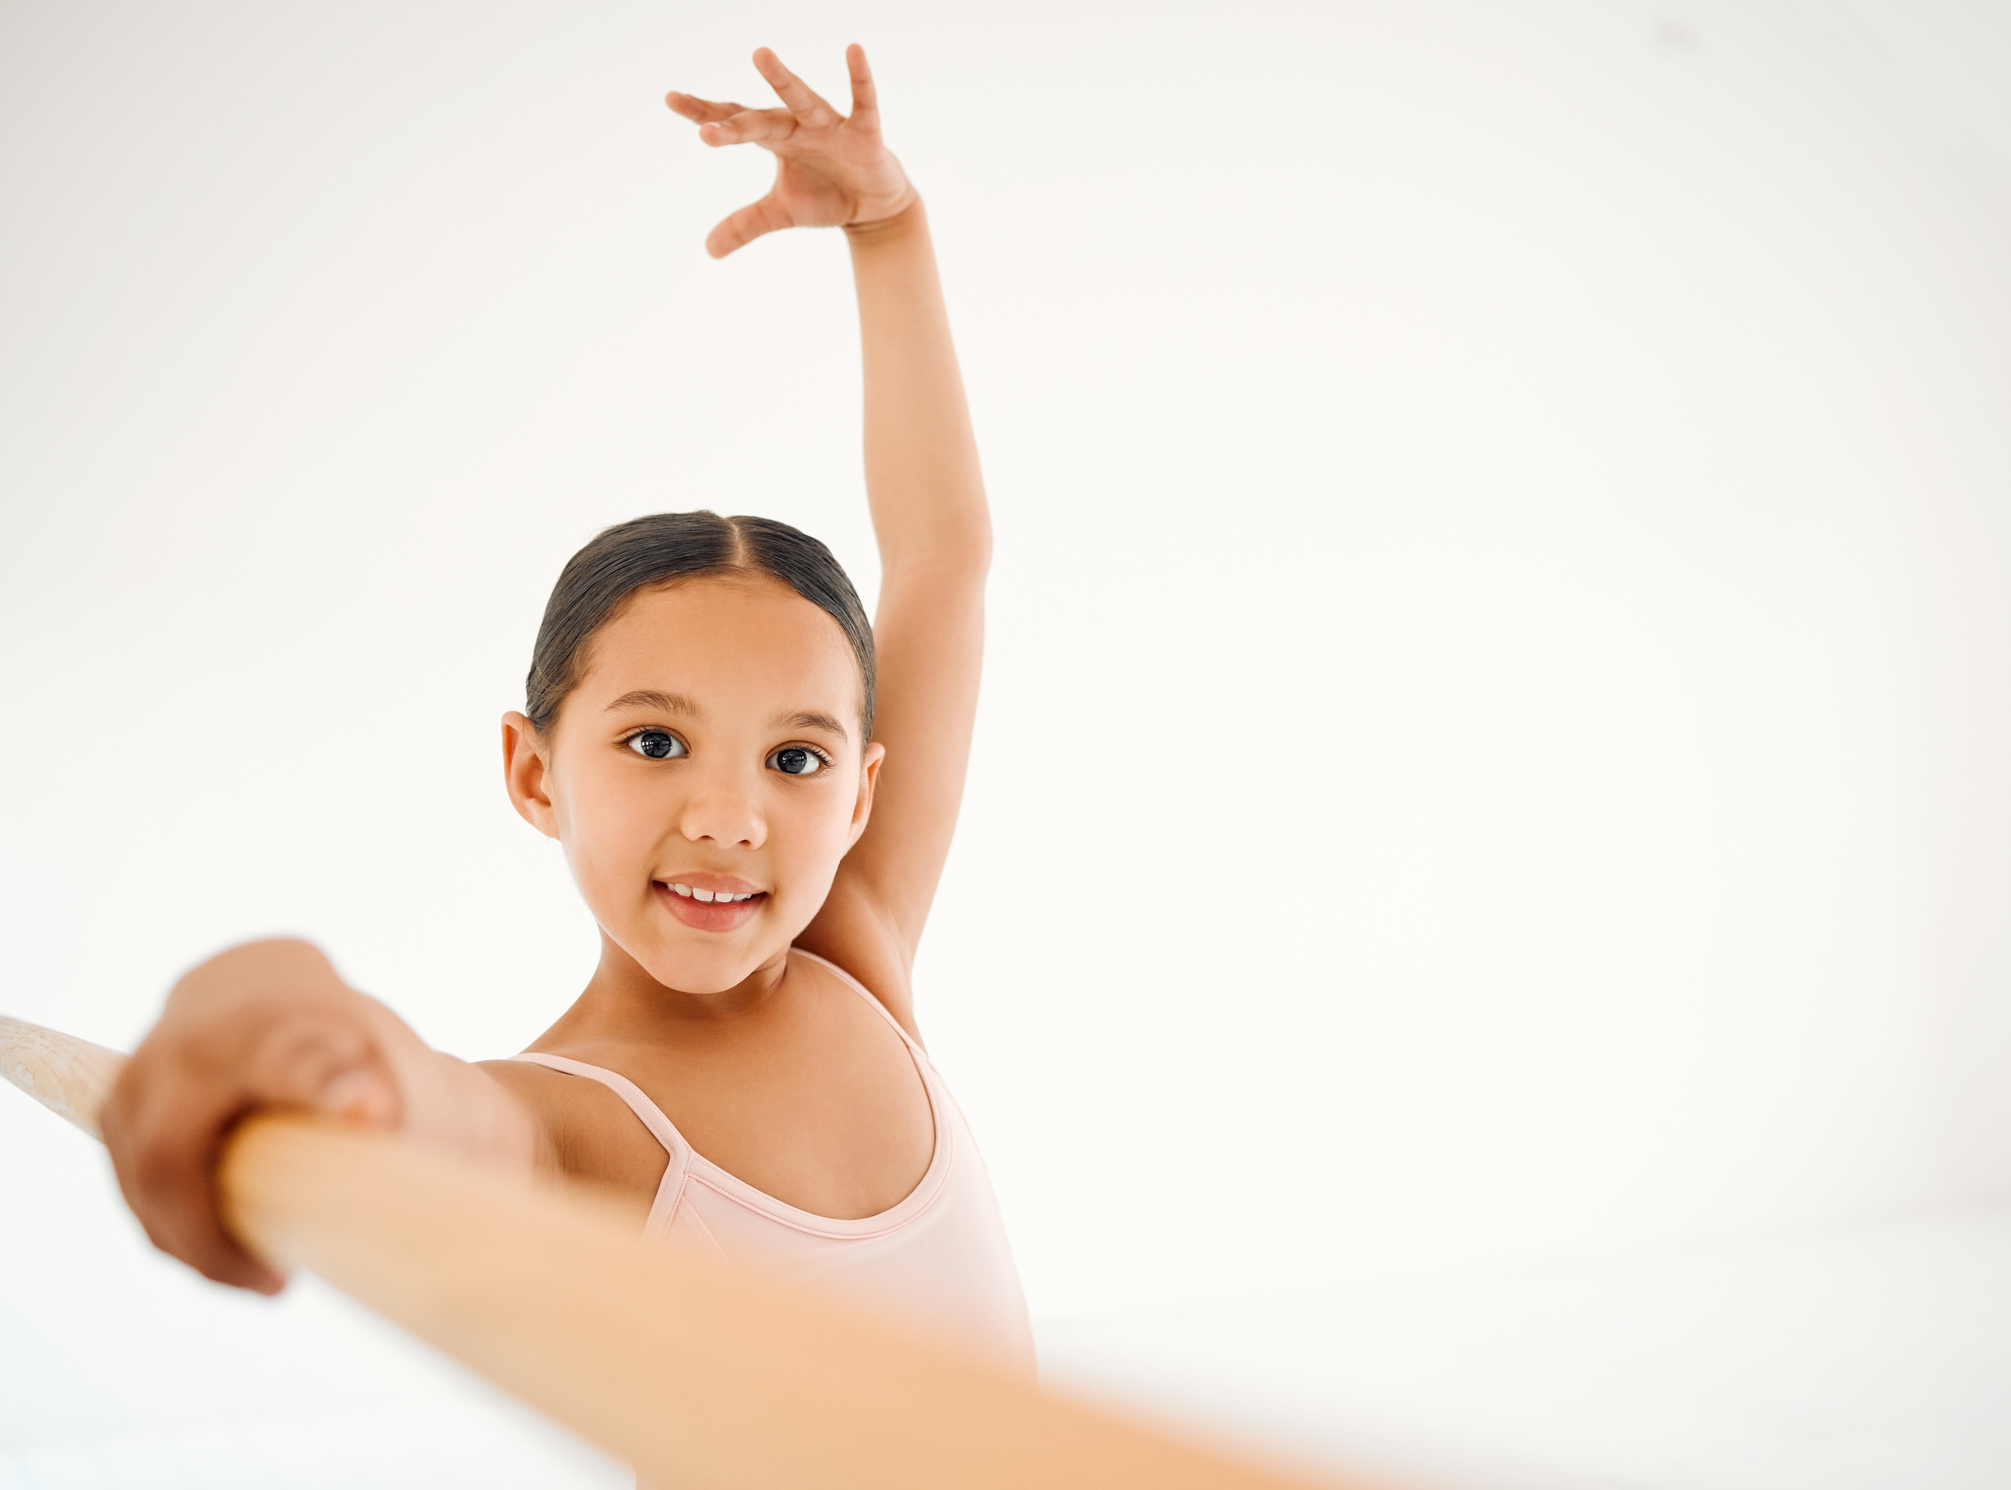 student from LA Dance Academy at the barre in ballet class